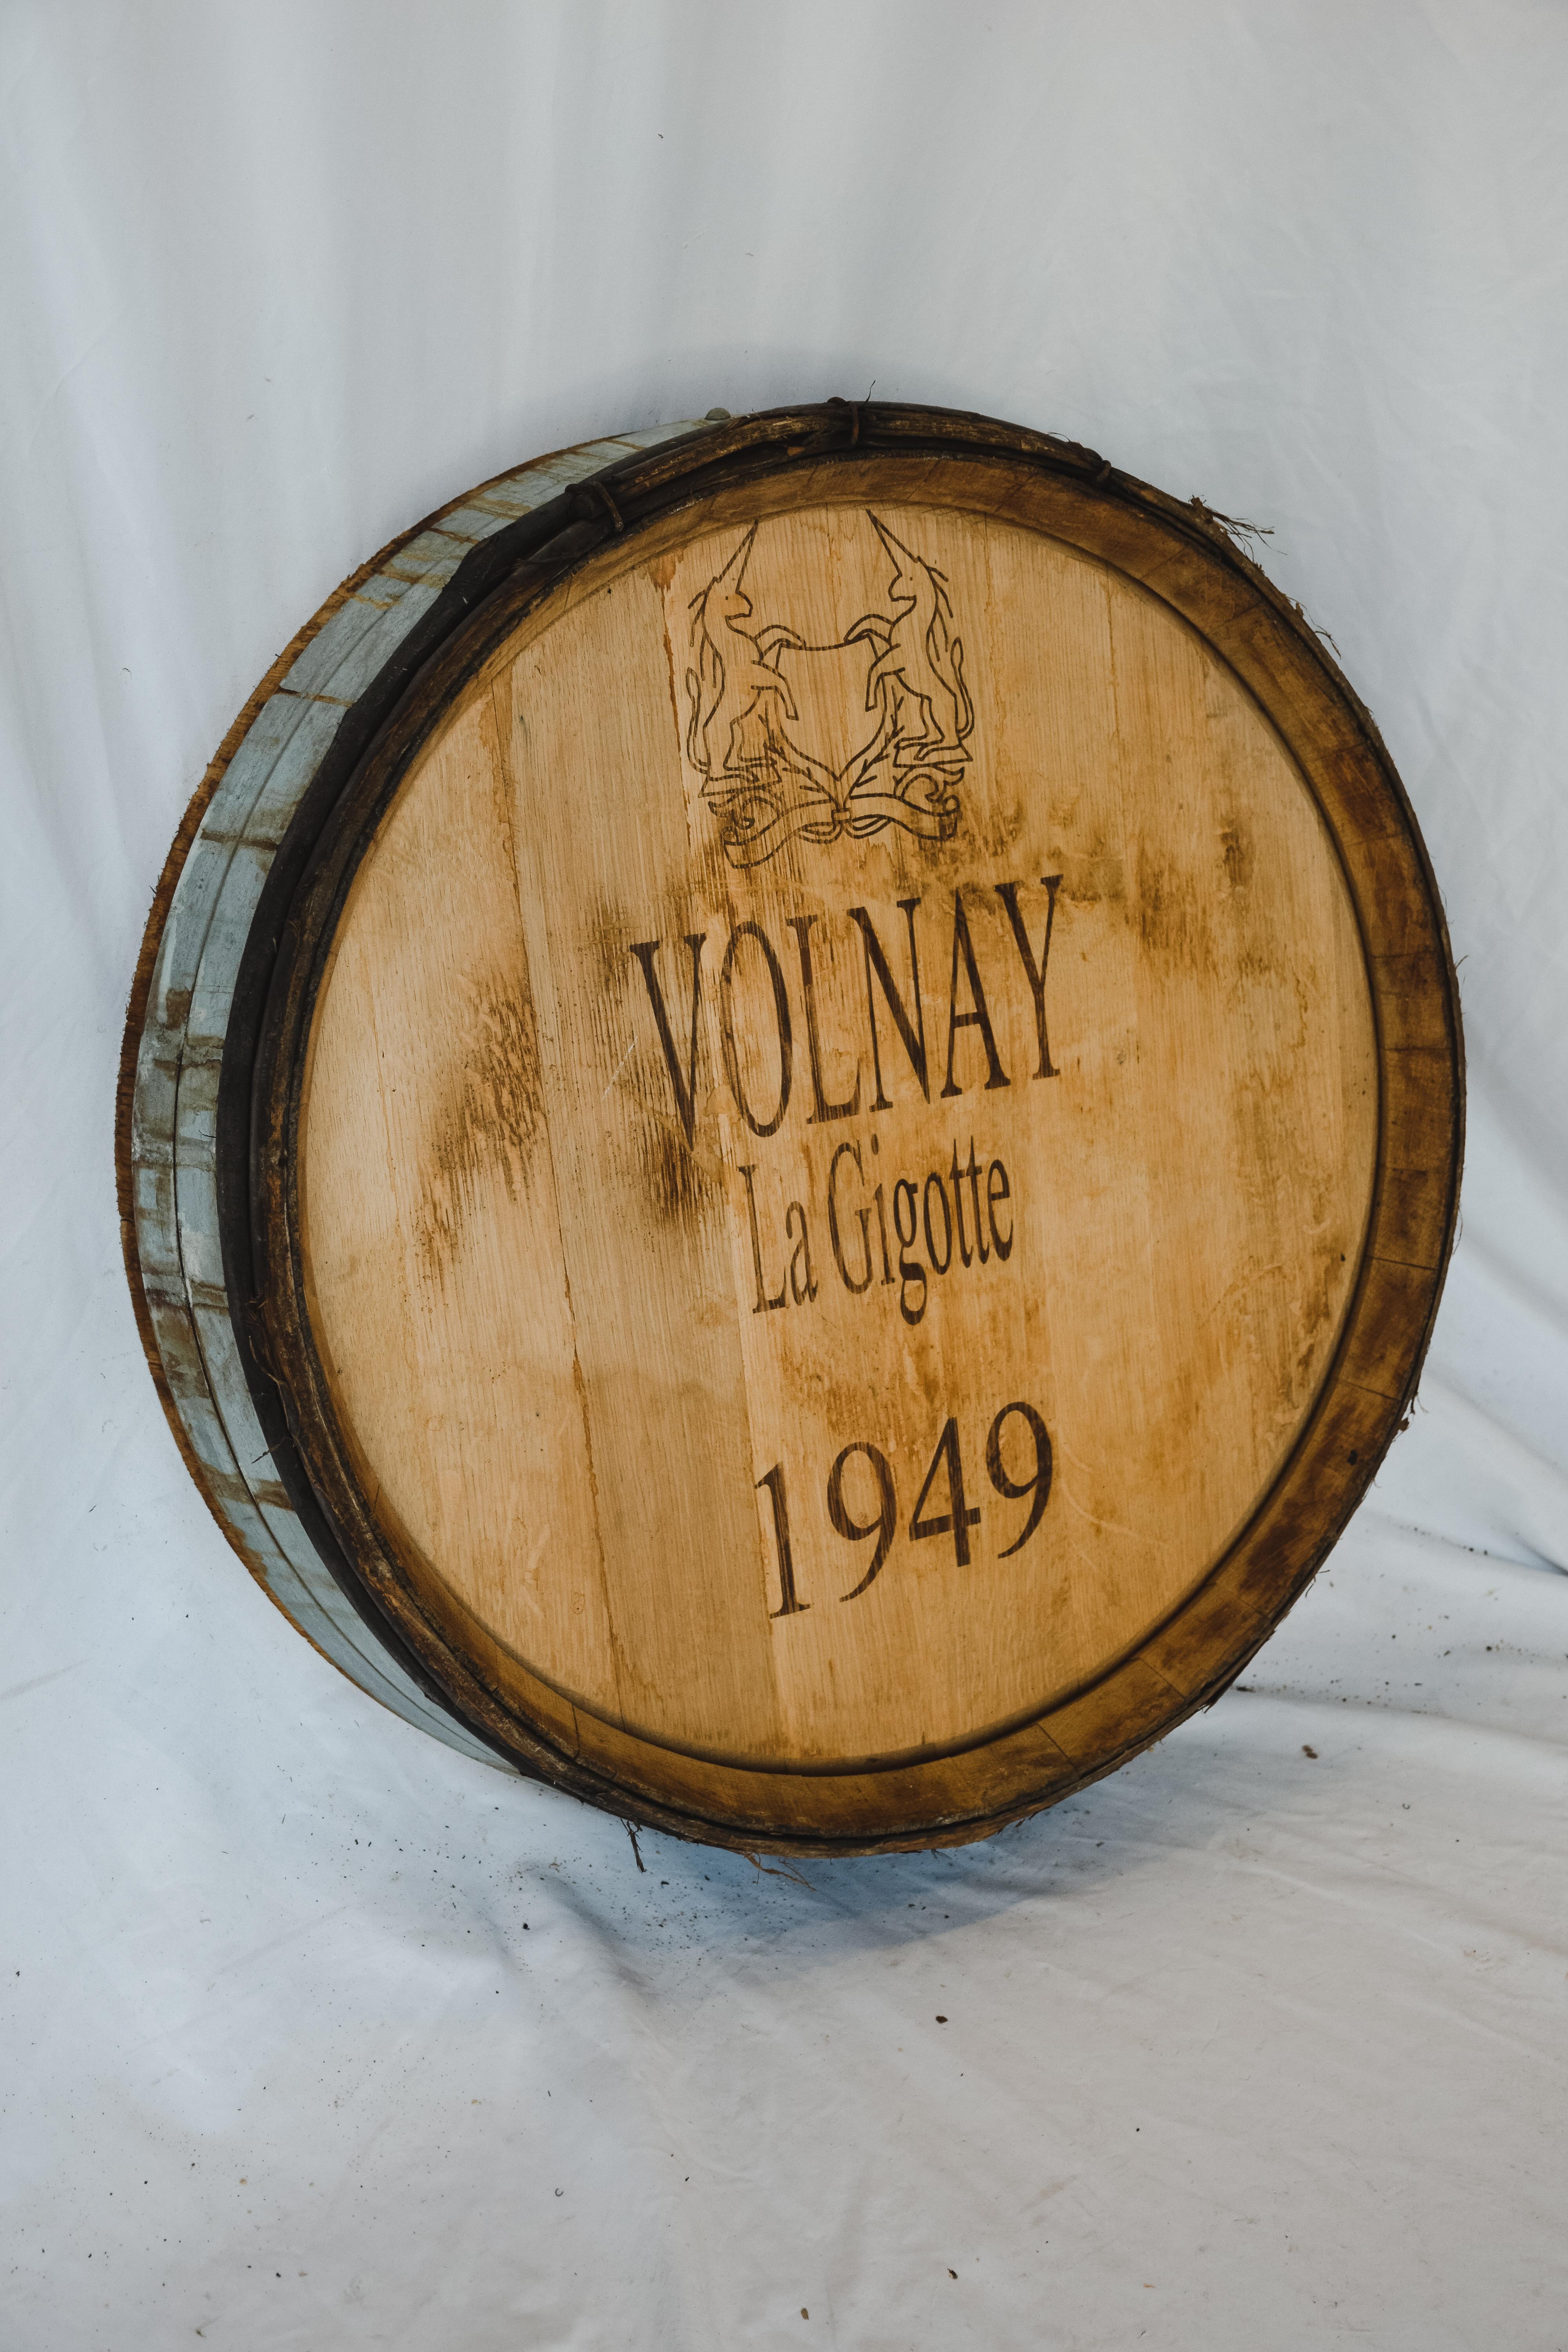 This Antique Wine Barrel Façade comes out of the wine cellars in France. The character and aged wood give it perfect presentation to hang in your wine room or any living space. The Volnay La Gigotte 1949 custom stamp was added at a later date.